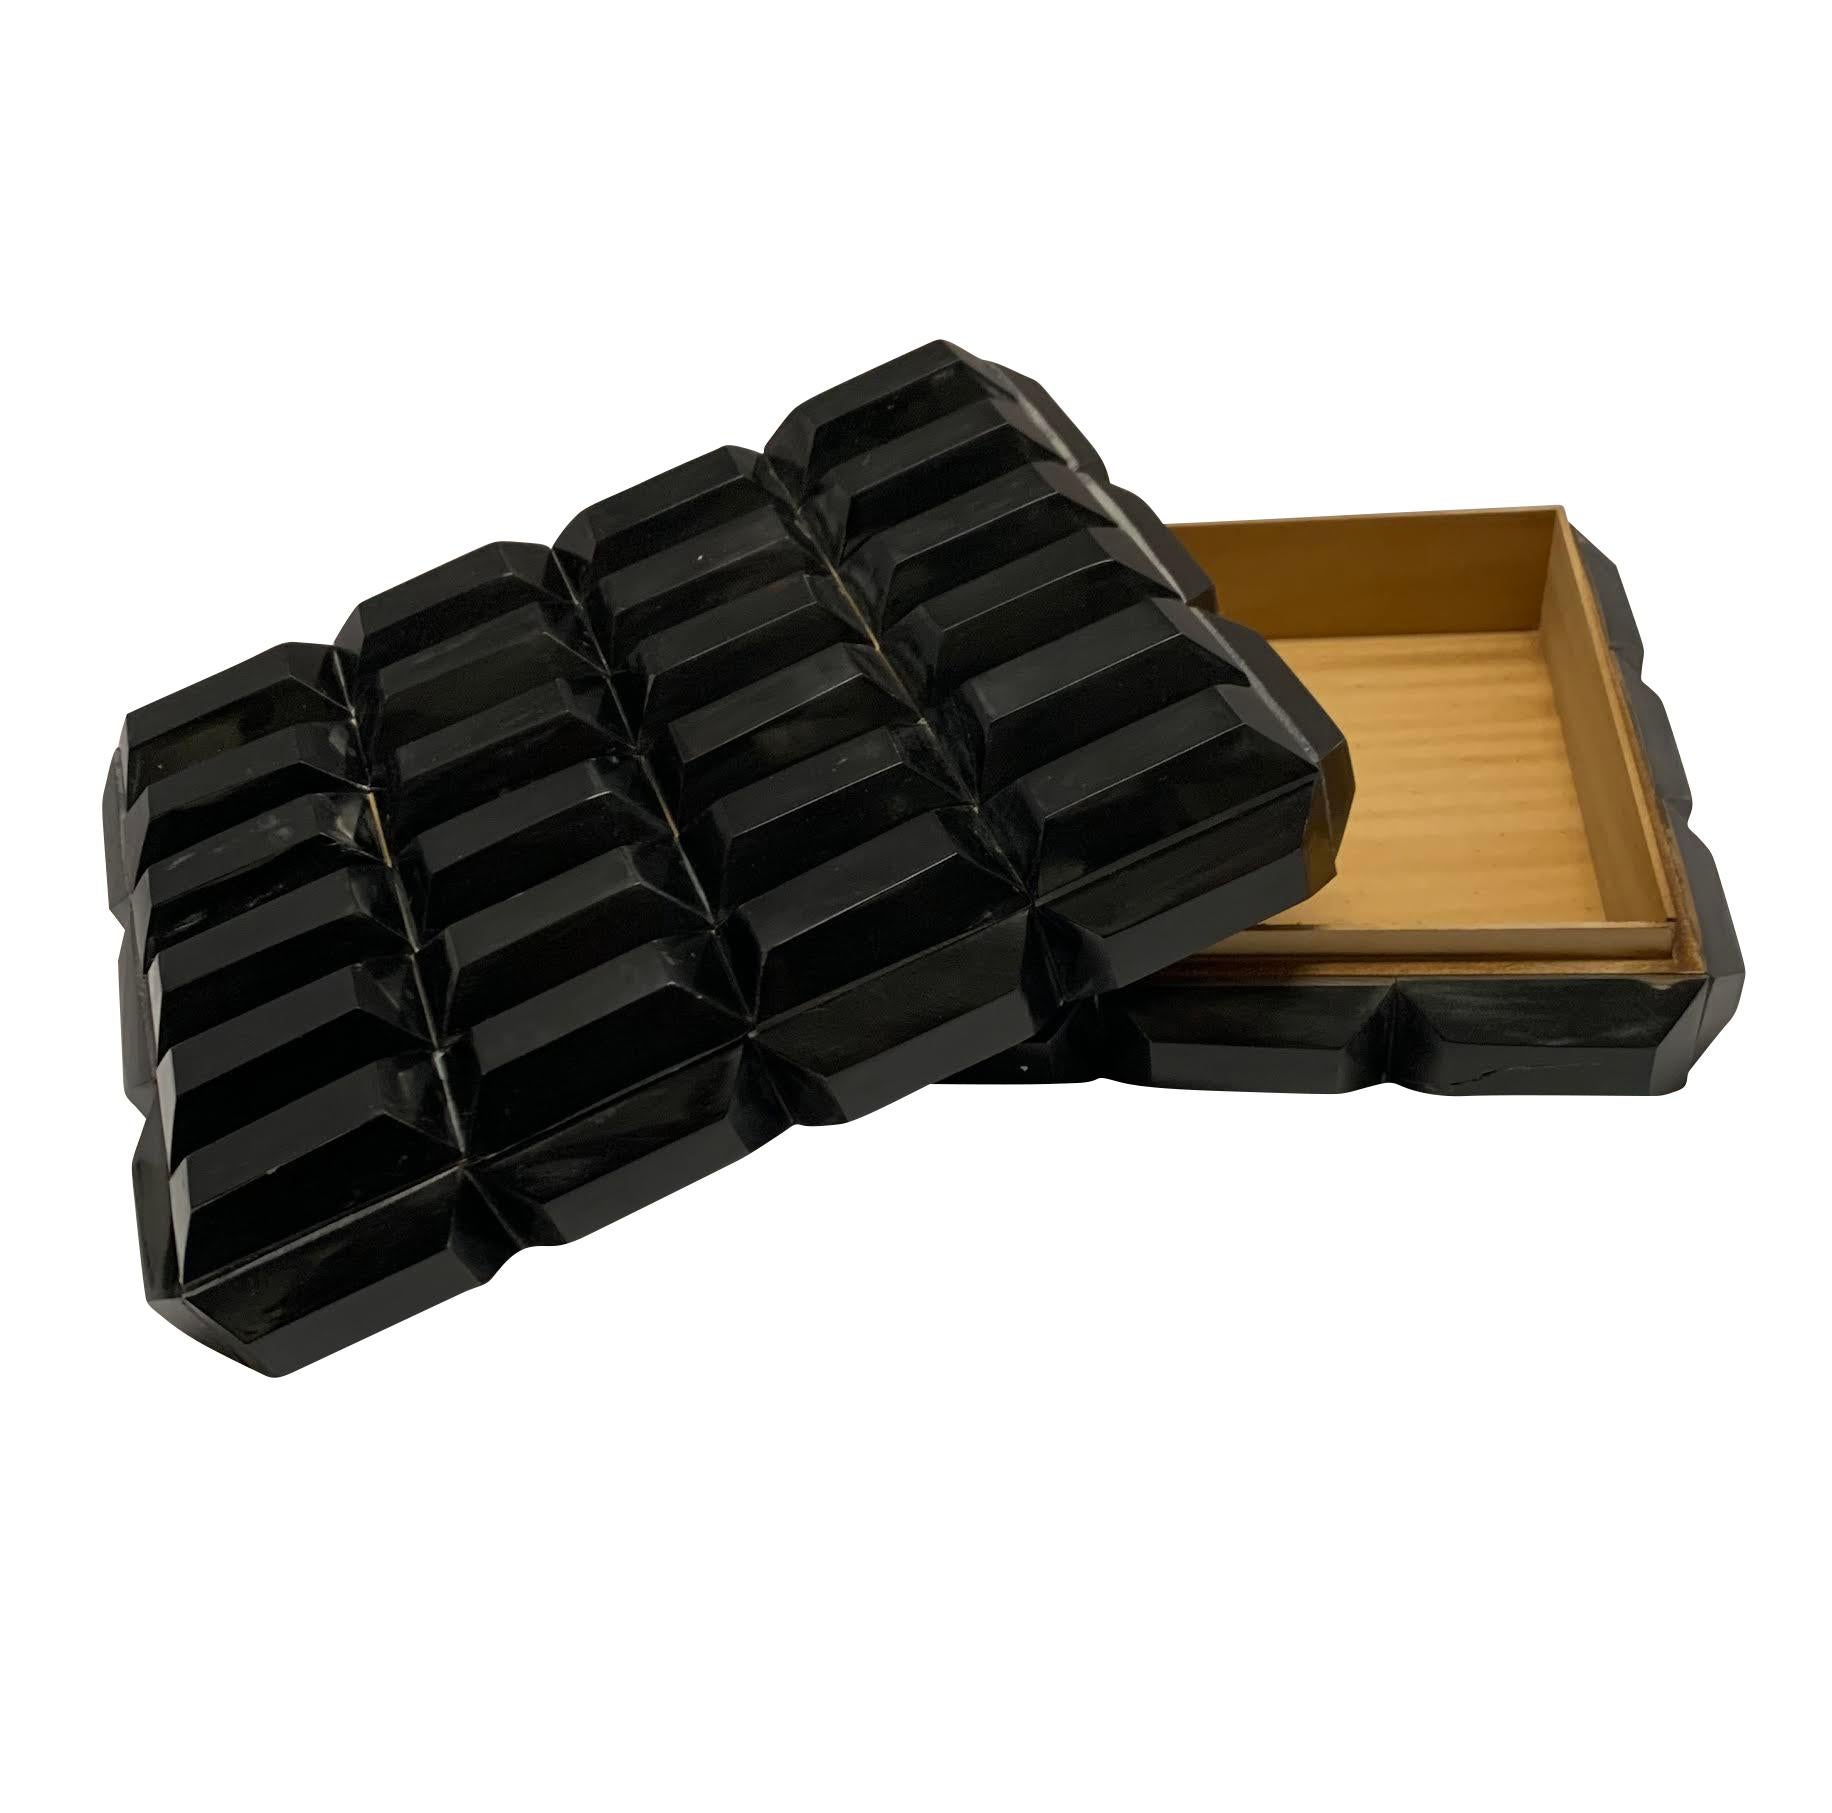 Contemporary Indian three dimensional design black colored lidded bone box.
Part of a large collection of bone boxes and trays.